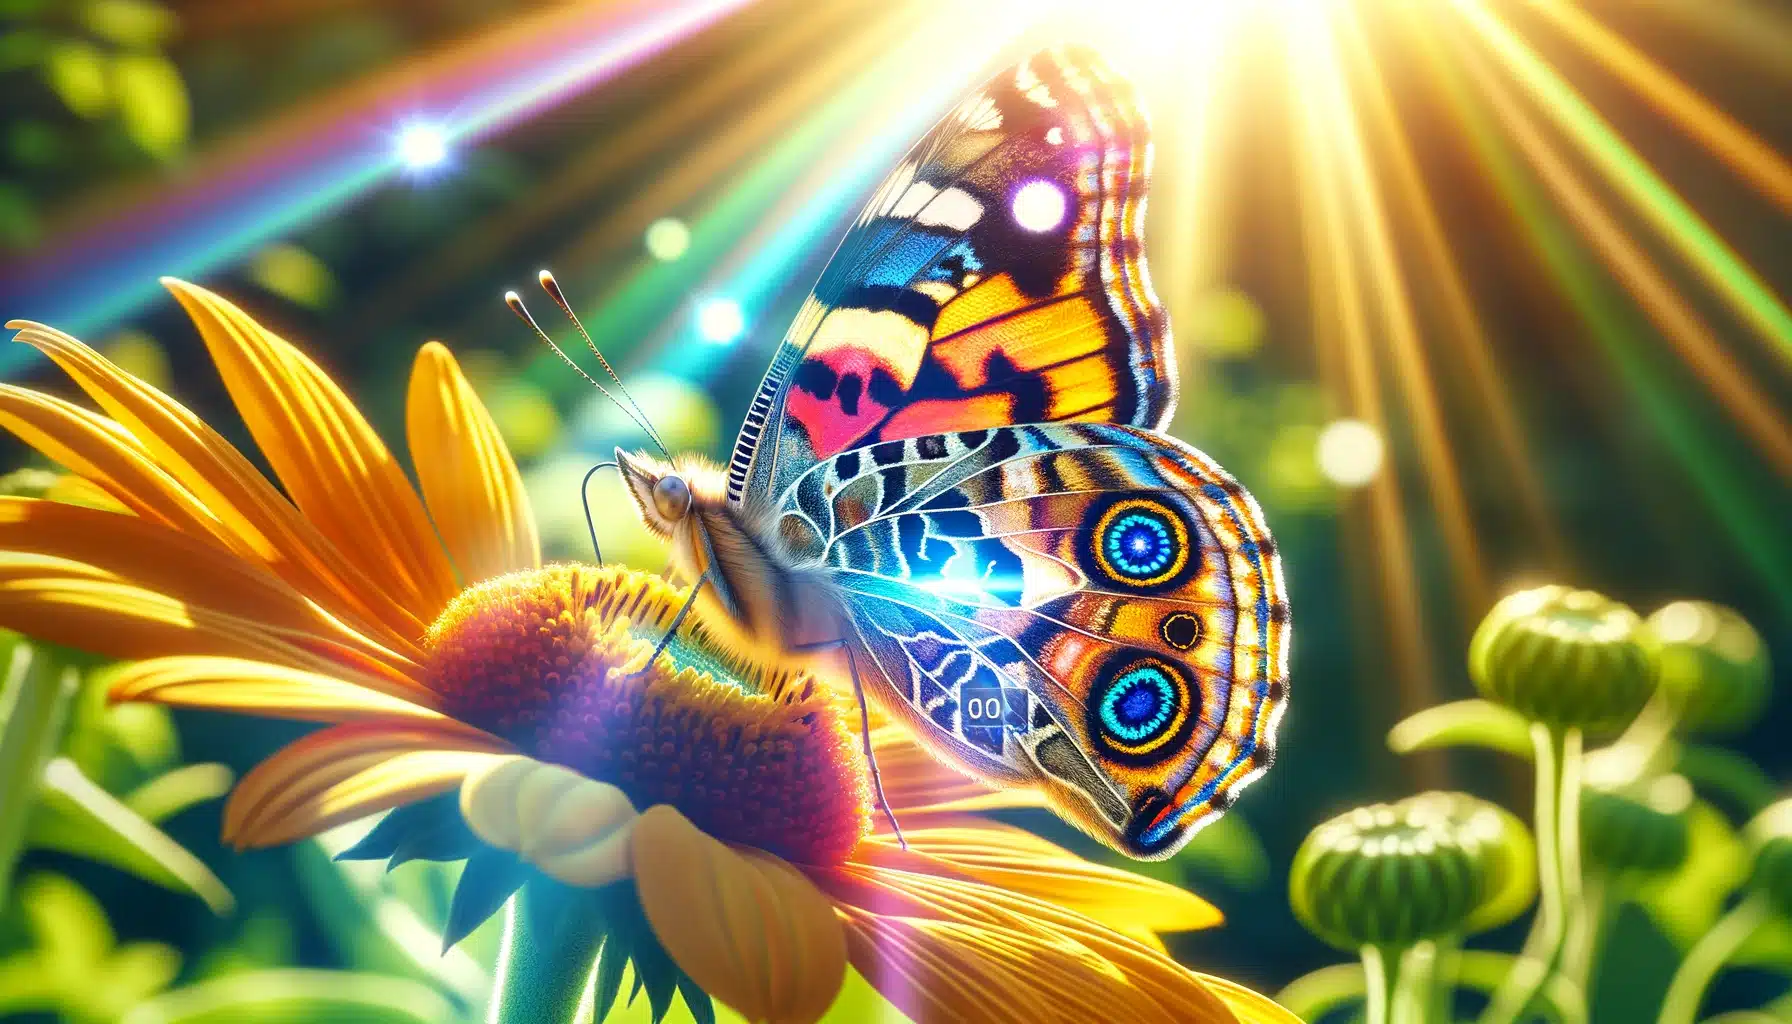 Close-up of a butterfly on a flower in bright sunlight, showcasing vivid colors and patterns.